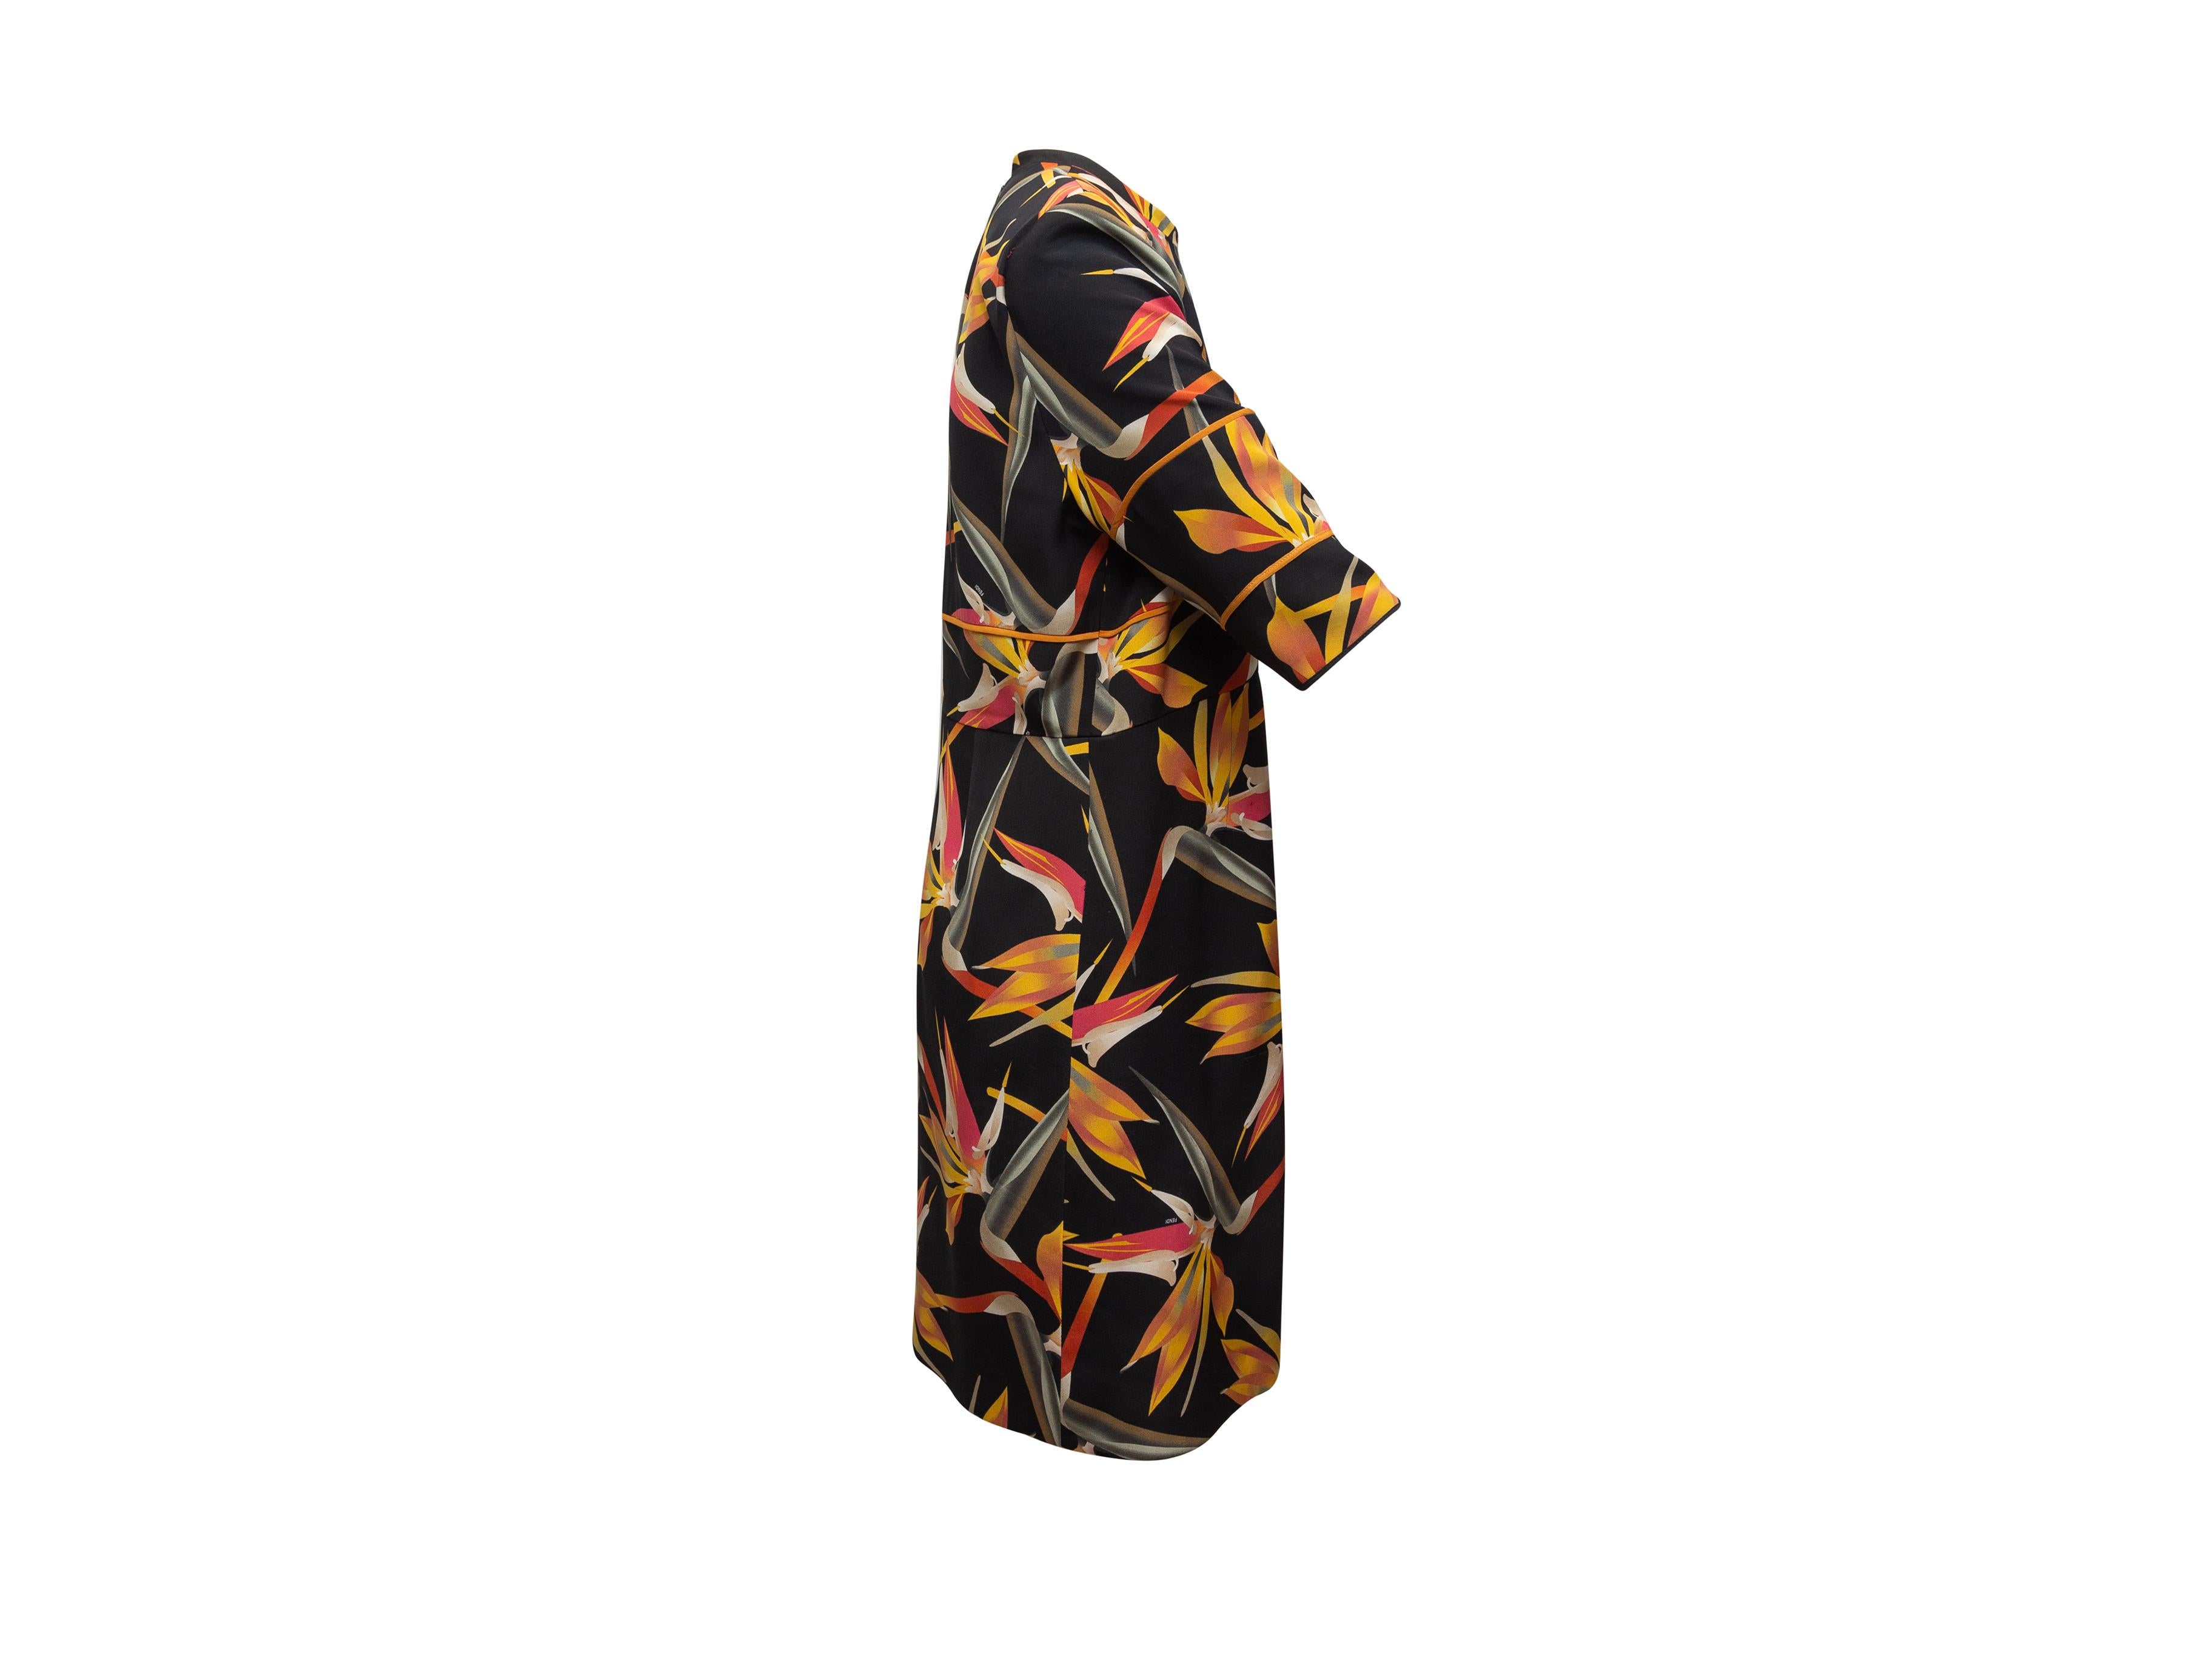 Product details: Black and multicolor floral print dress by Fendi. Crew neck. Three-quarter sleeves. Zip closure at back. 40